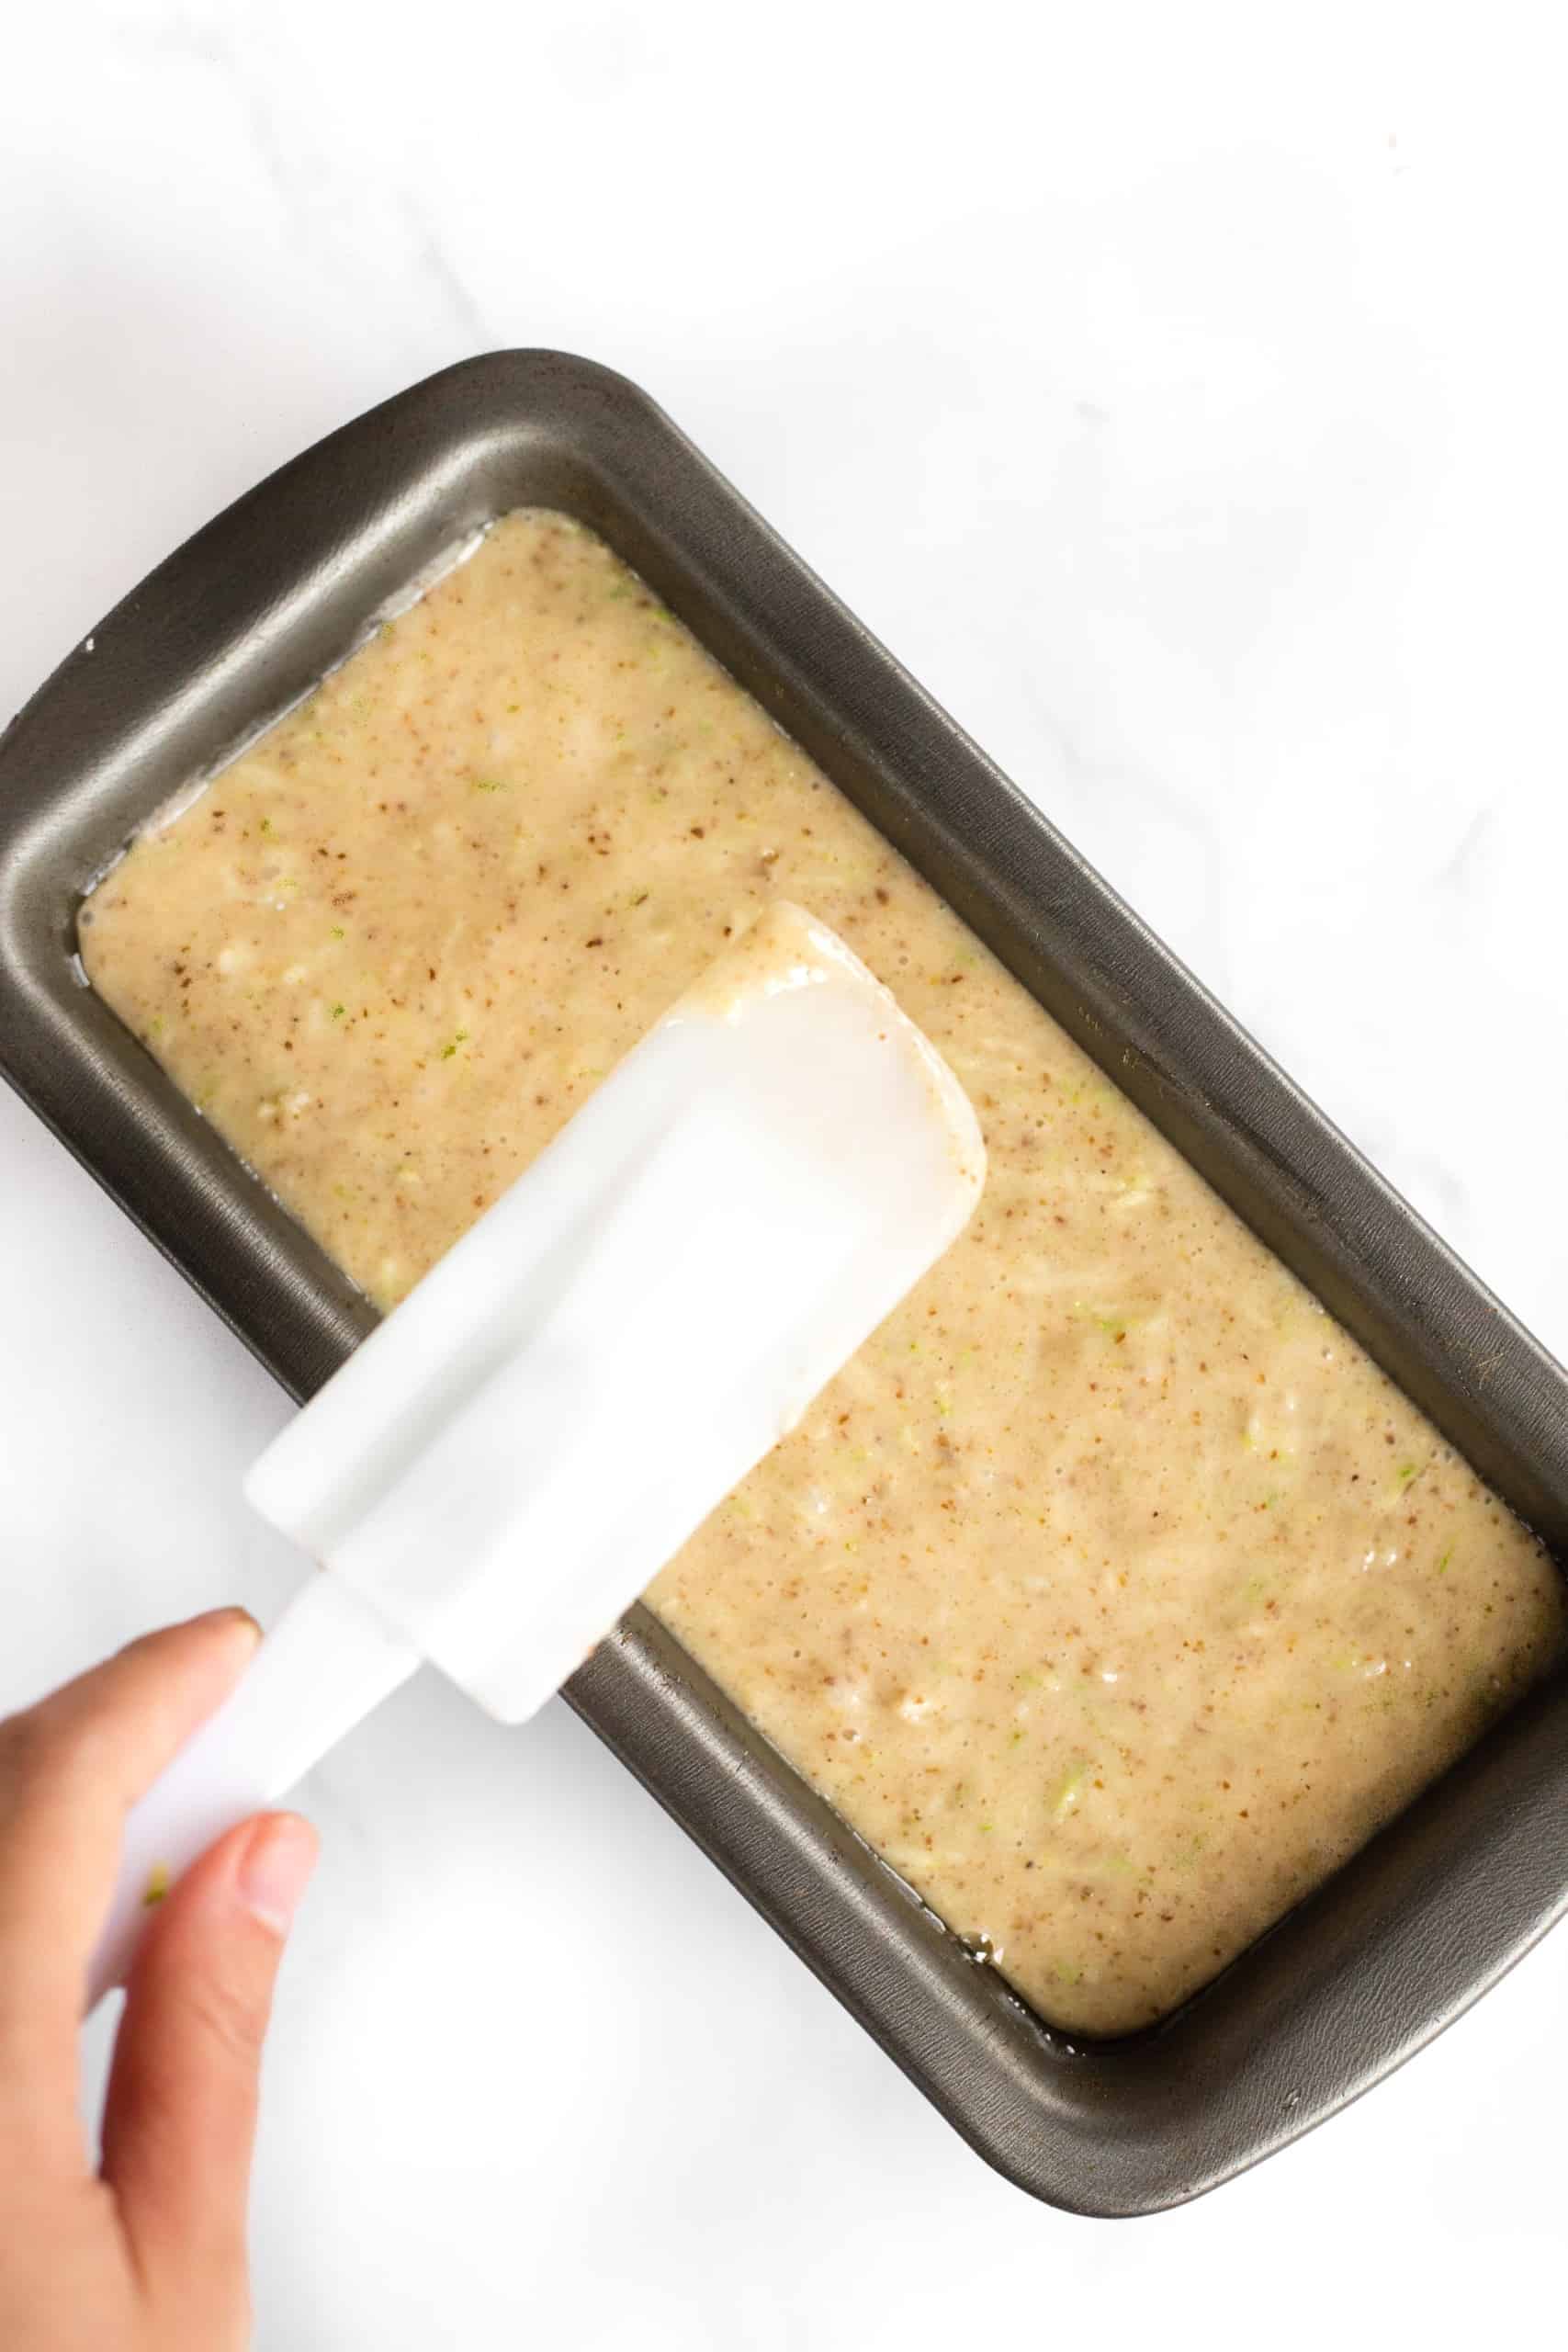 Using a spatula to smooth the top of batter in a metal loaf pan.